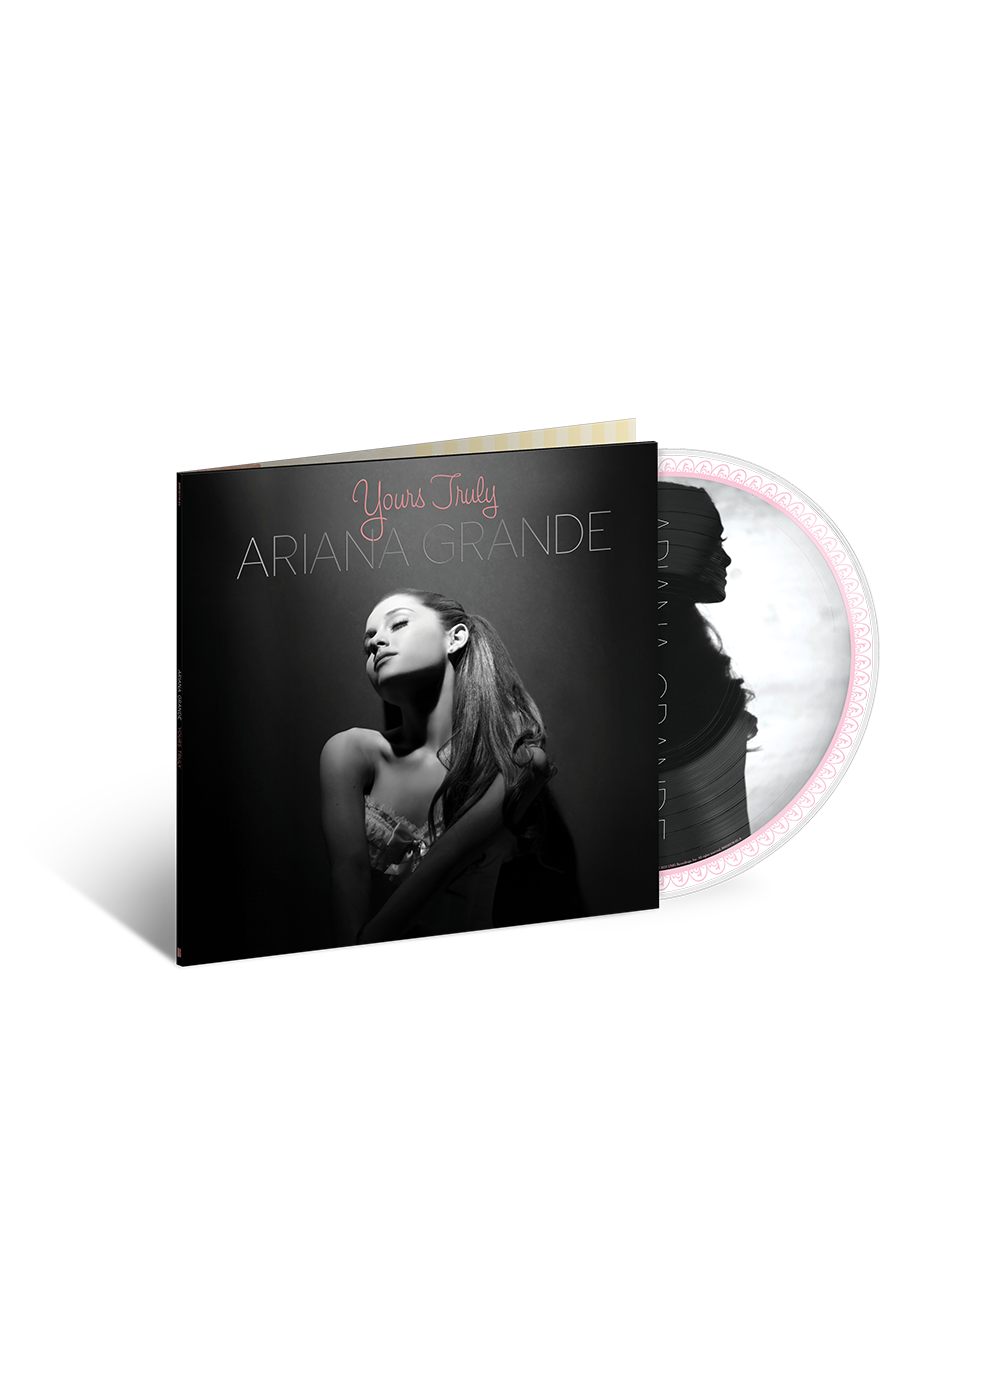 vinyle yours truly – Store Ariana Grande